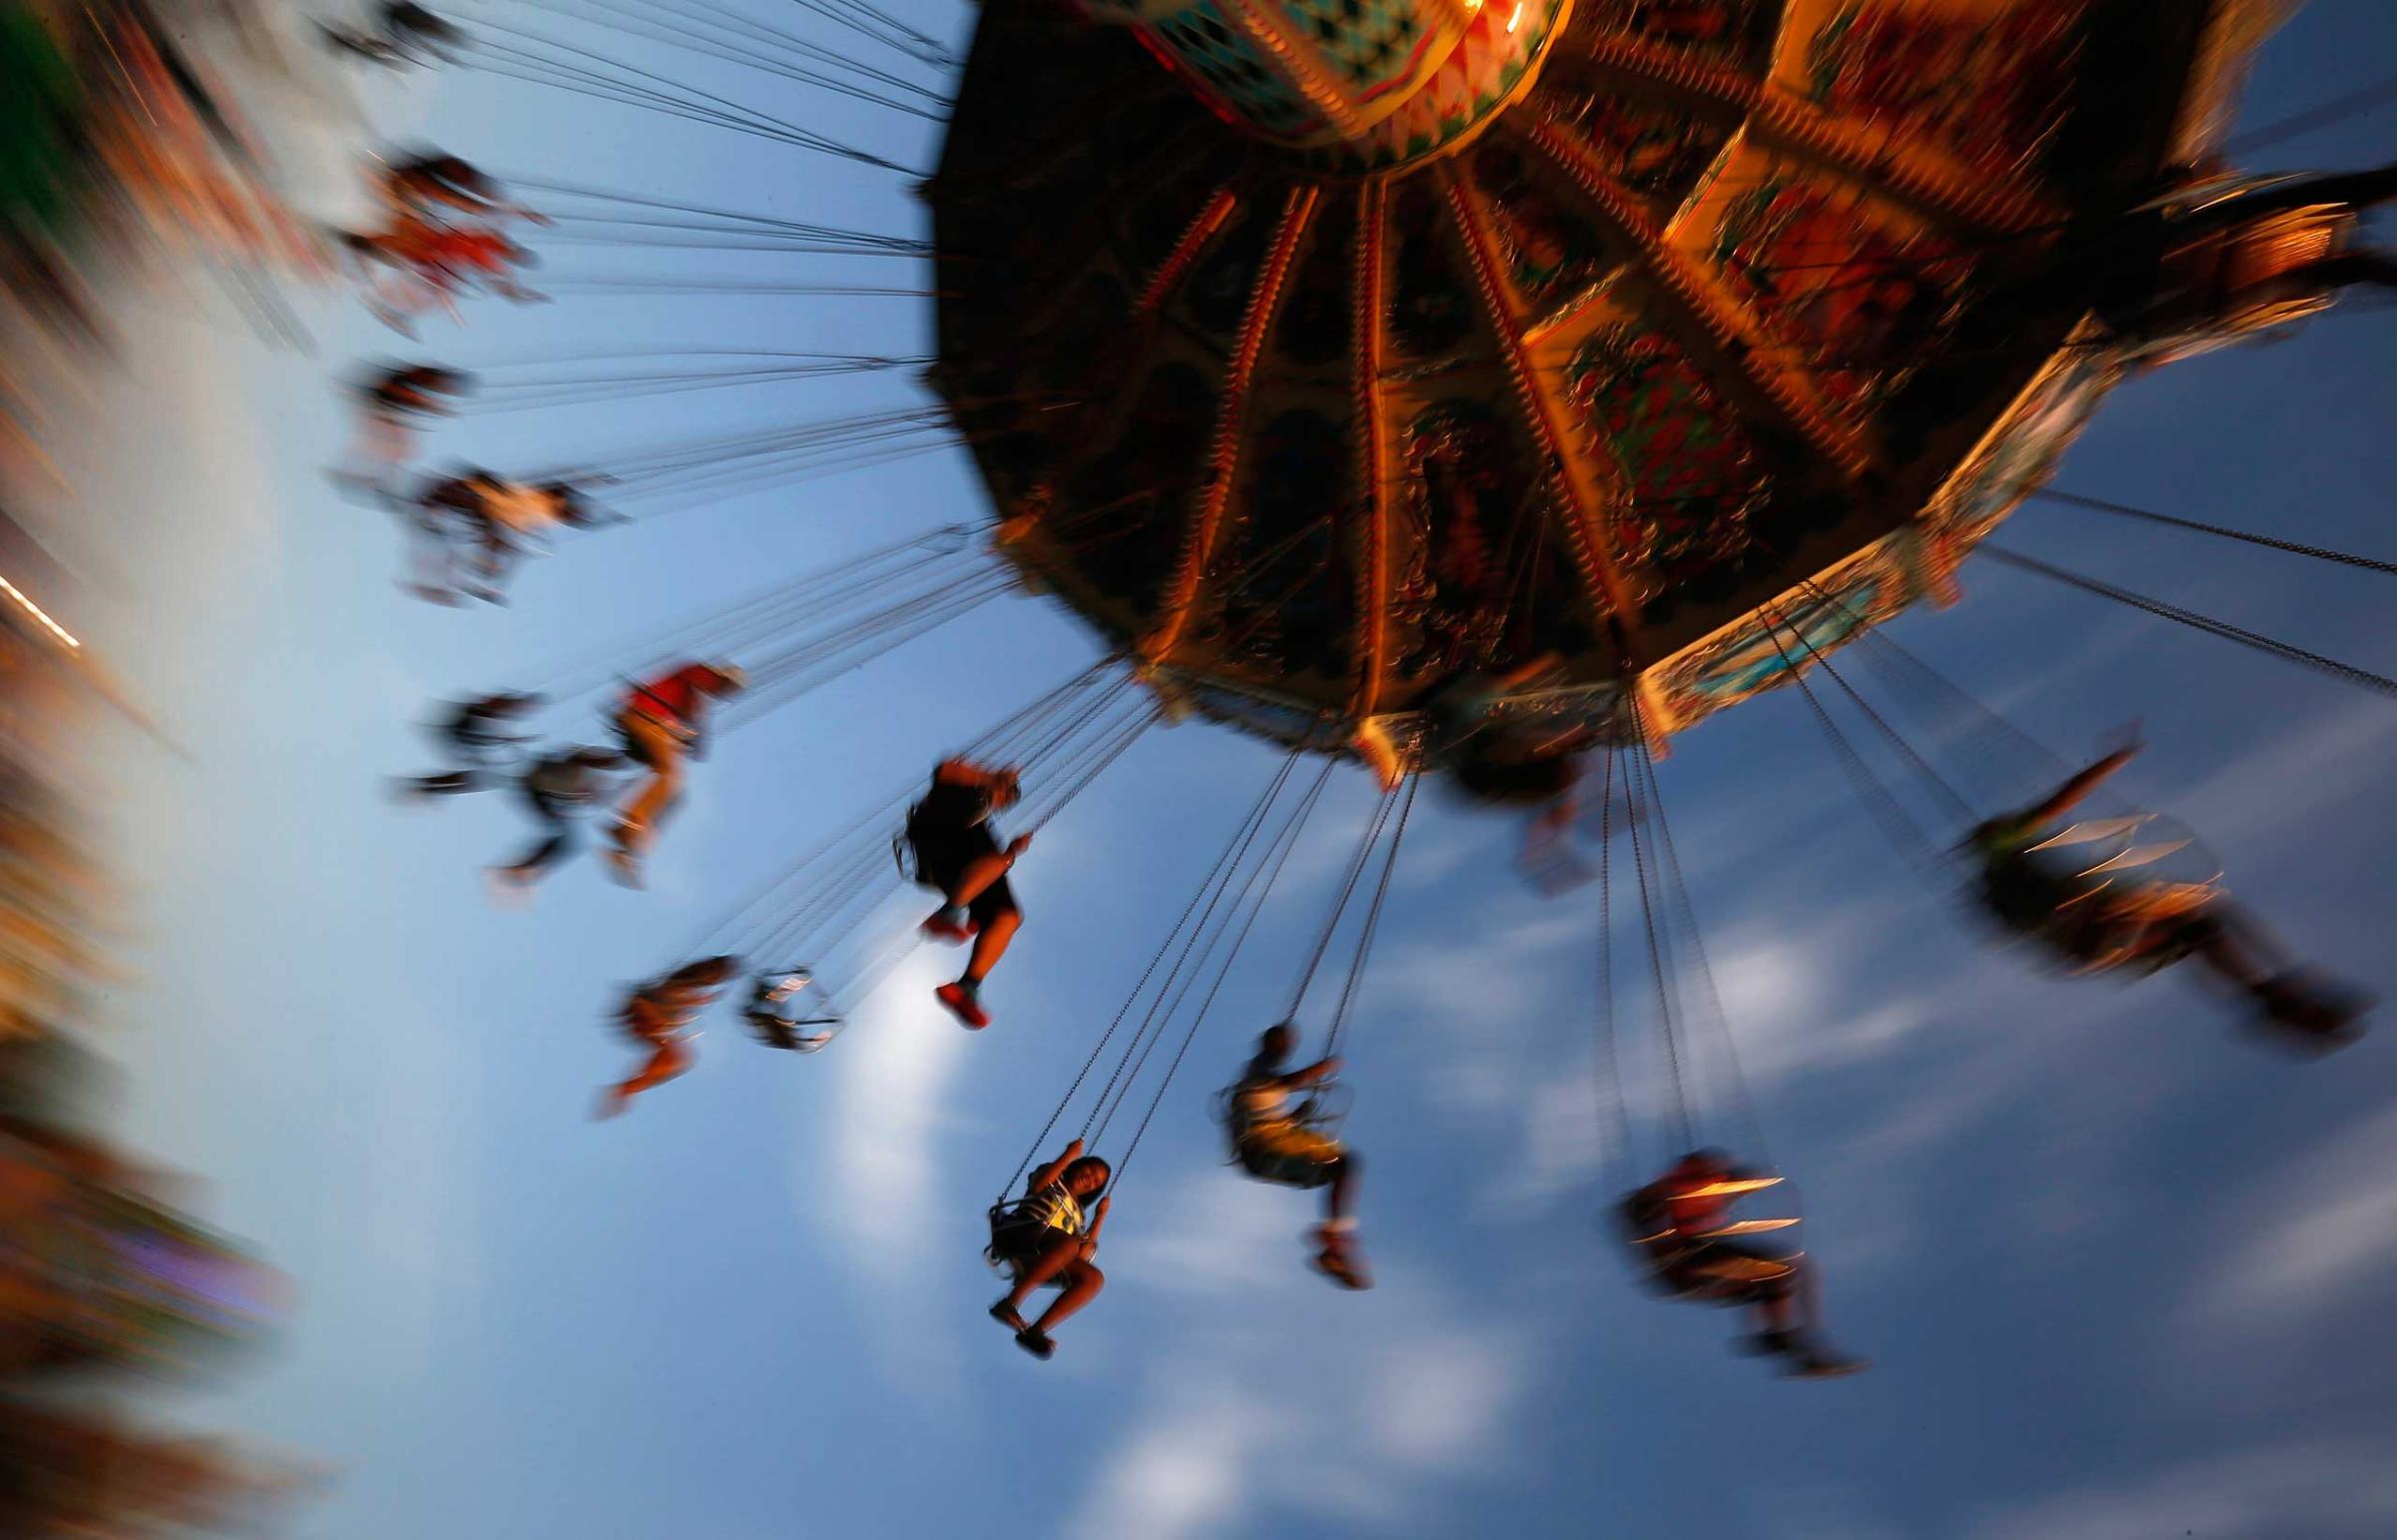 People ride on a swing at the Wisconsin State Fair in West Allis